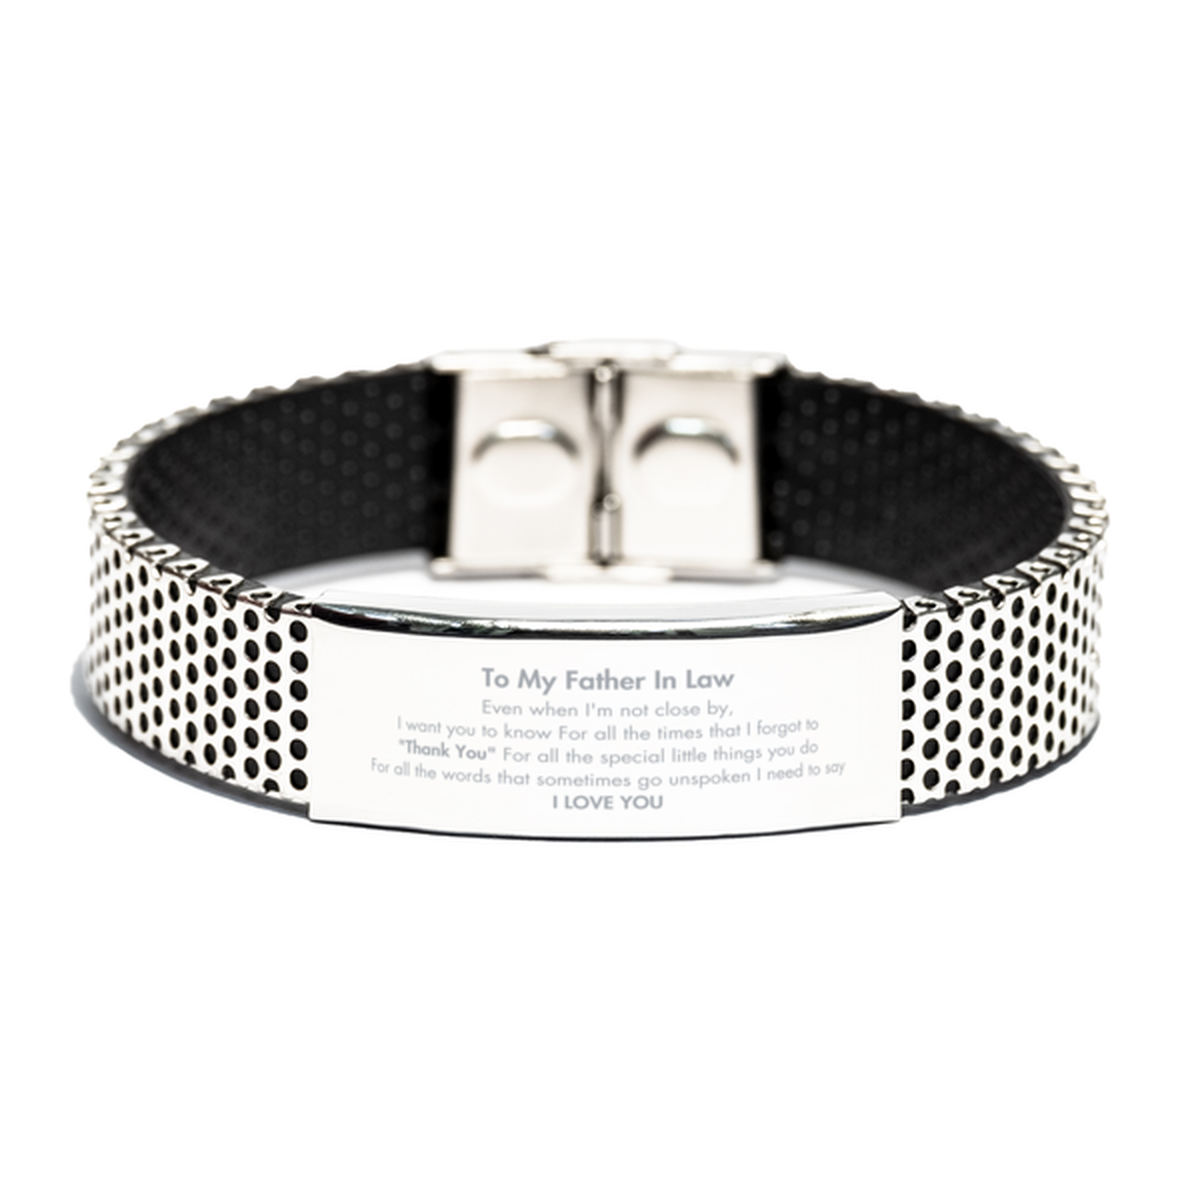 Thank You Gifts for Father In Law, Keepsake Stainless Steel Bracelet Gifts for Father In Law Birthday Mother's day Father's Day Father In Law For all the words That sometimes go unspoken I need to say I LOVE YOU